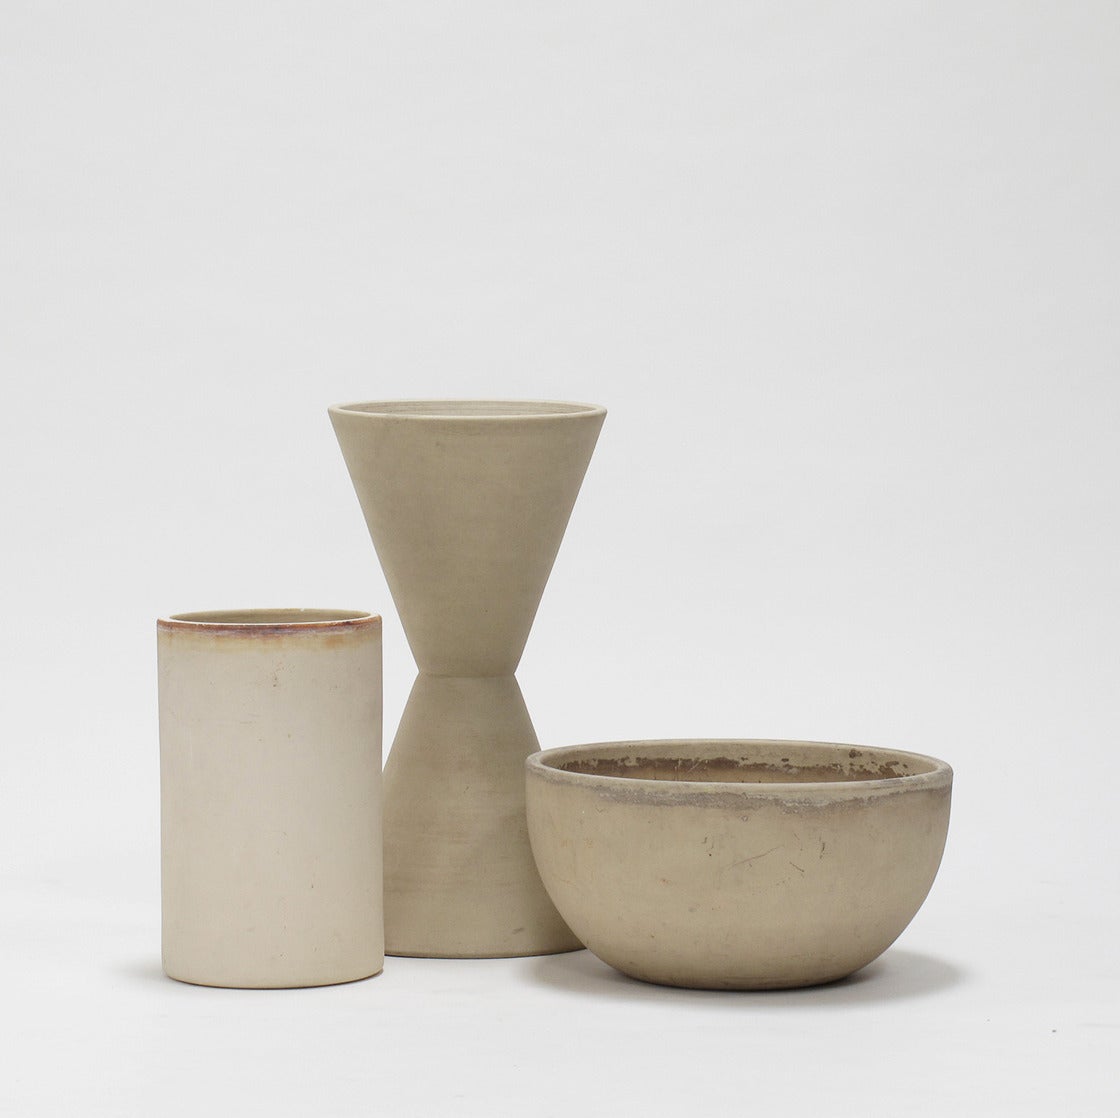 Collection of vintage AP including three designs in bisque, the T-102 by Lagardo Tackett, the FX-02 and C-8-12 by John Follis, Architectural Pottery, Los Angeles, California, 1950s.